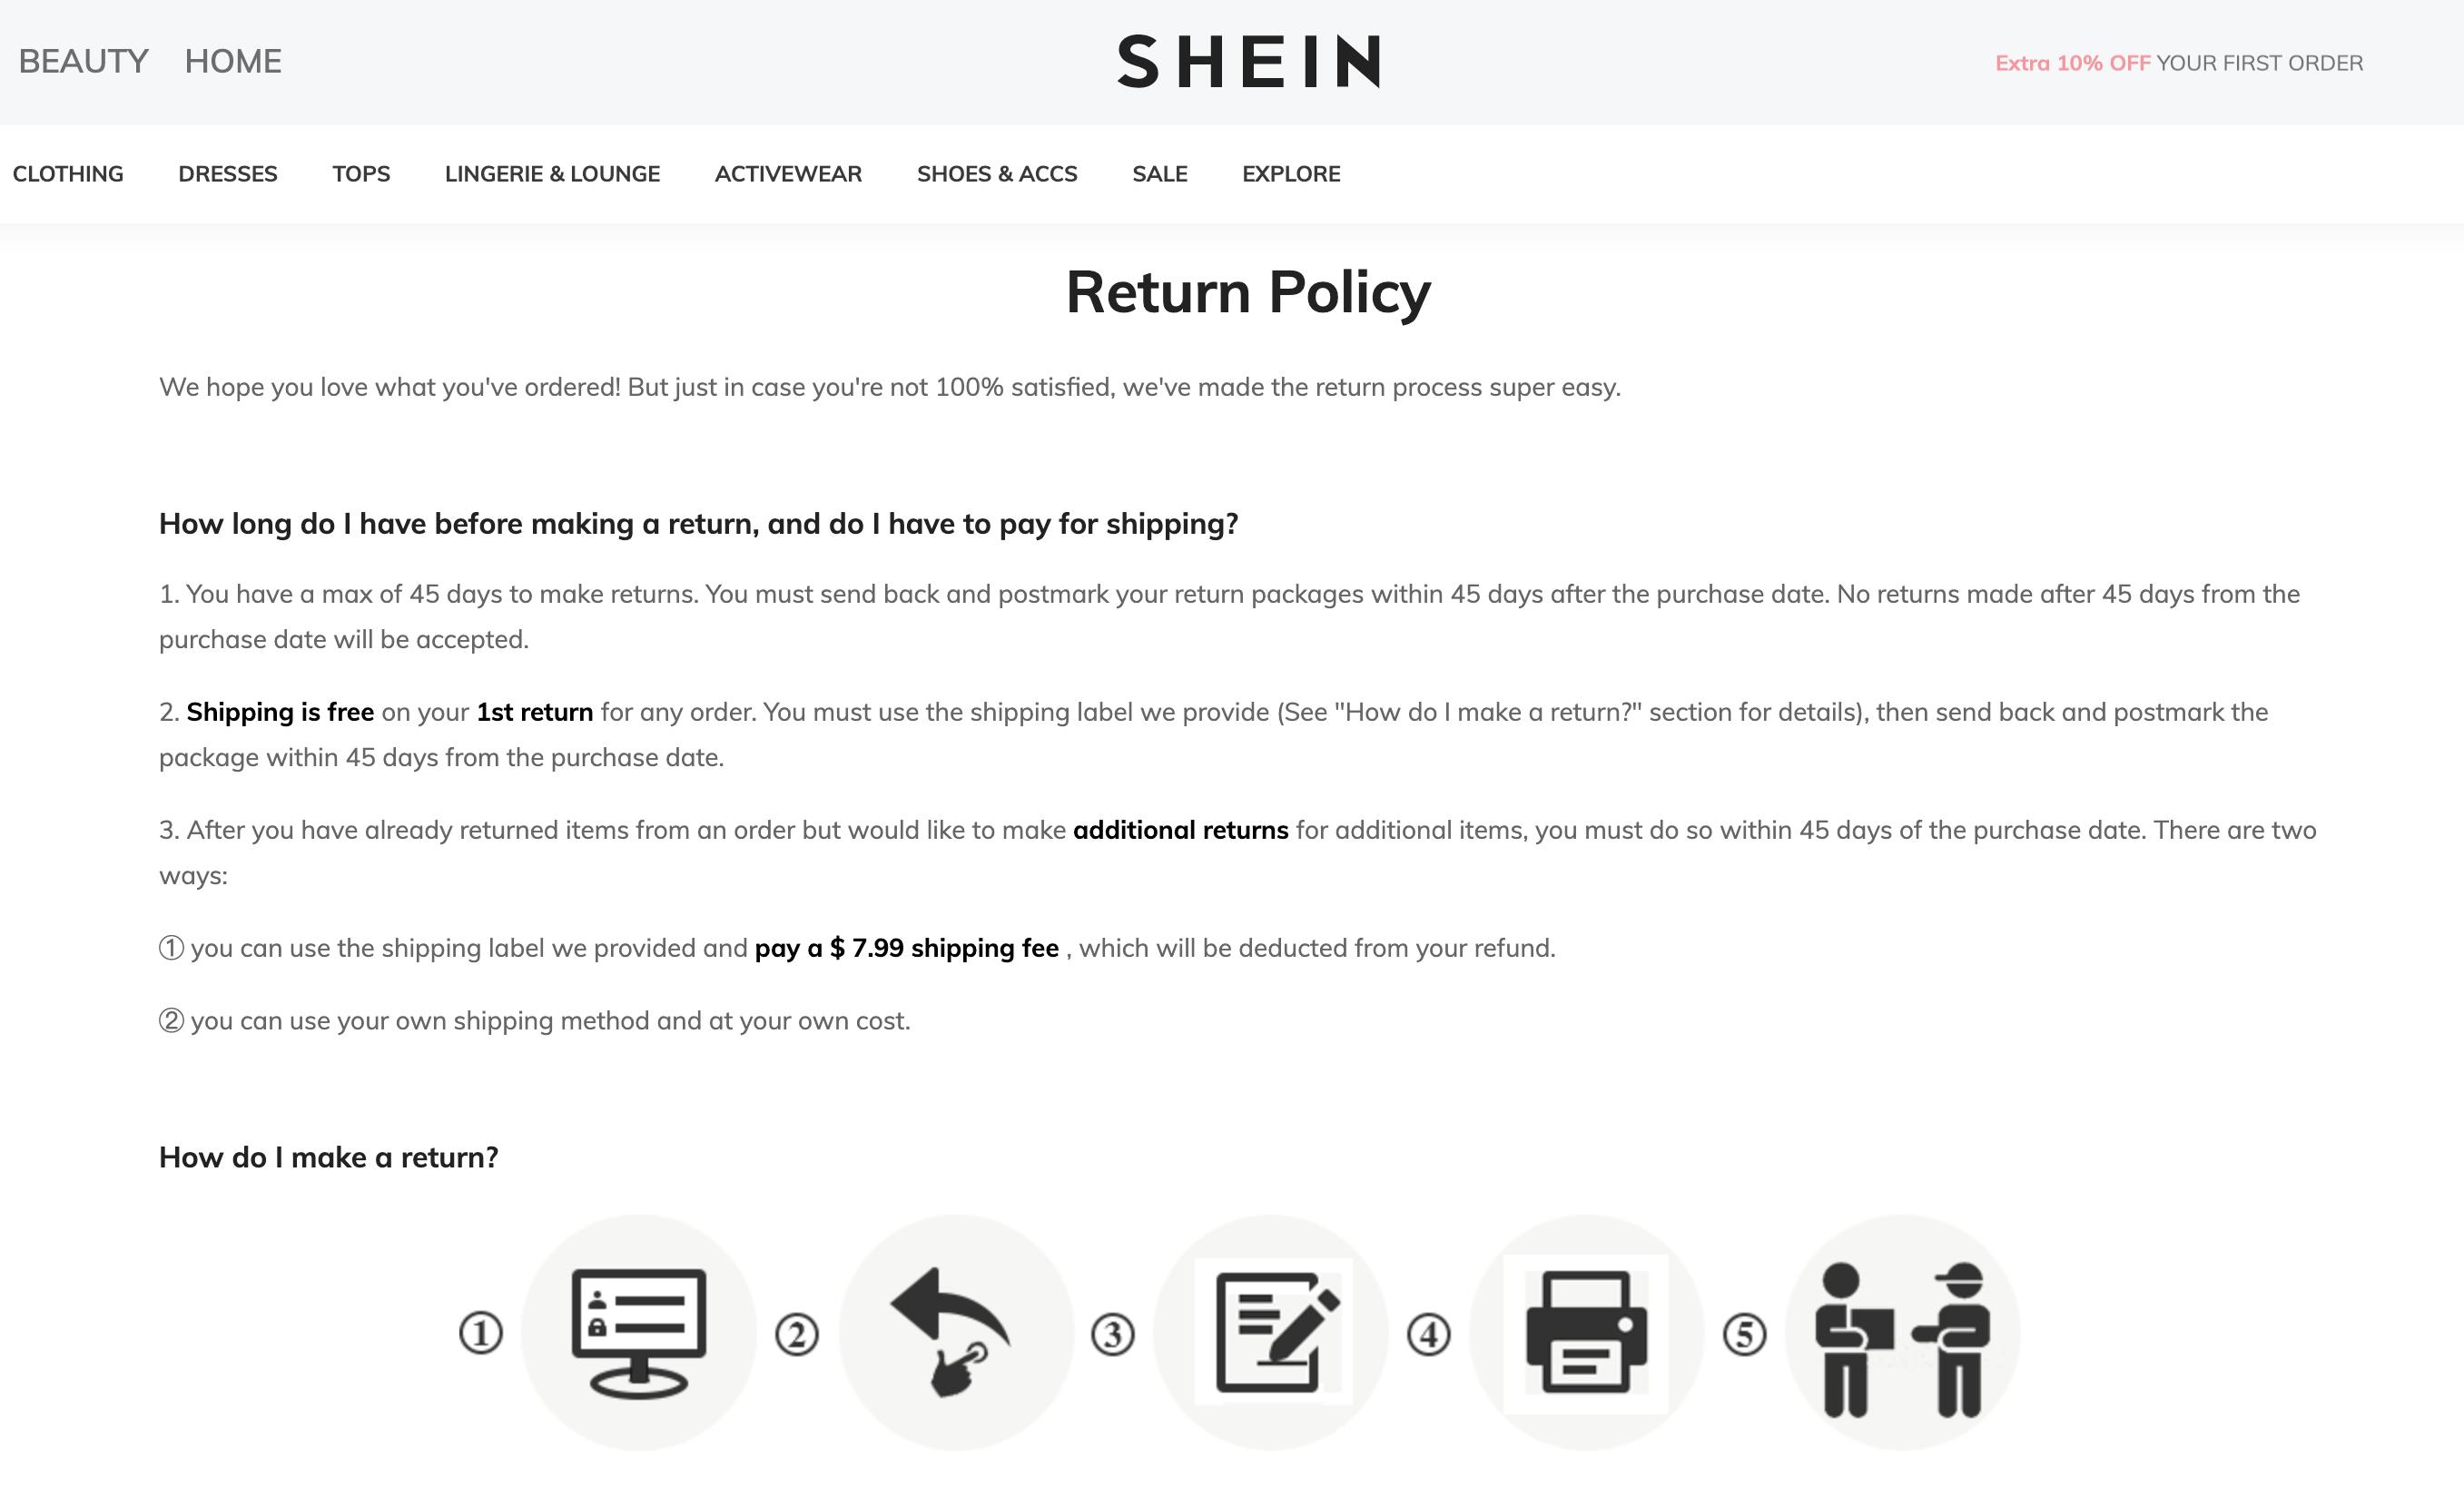 screenshot of shein.com return policy stating free shipping on your first return